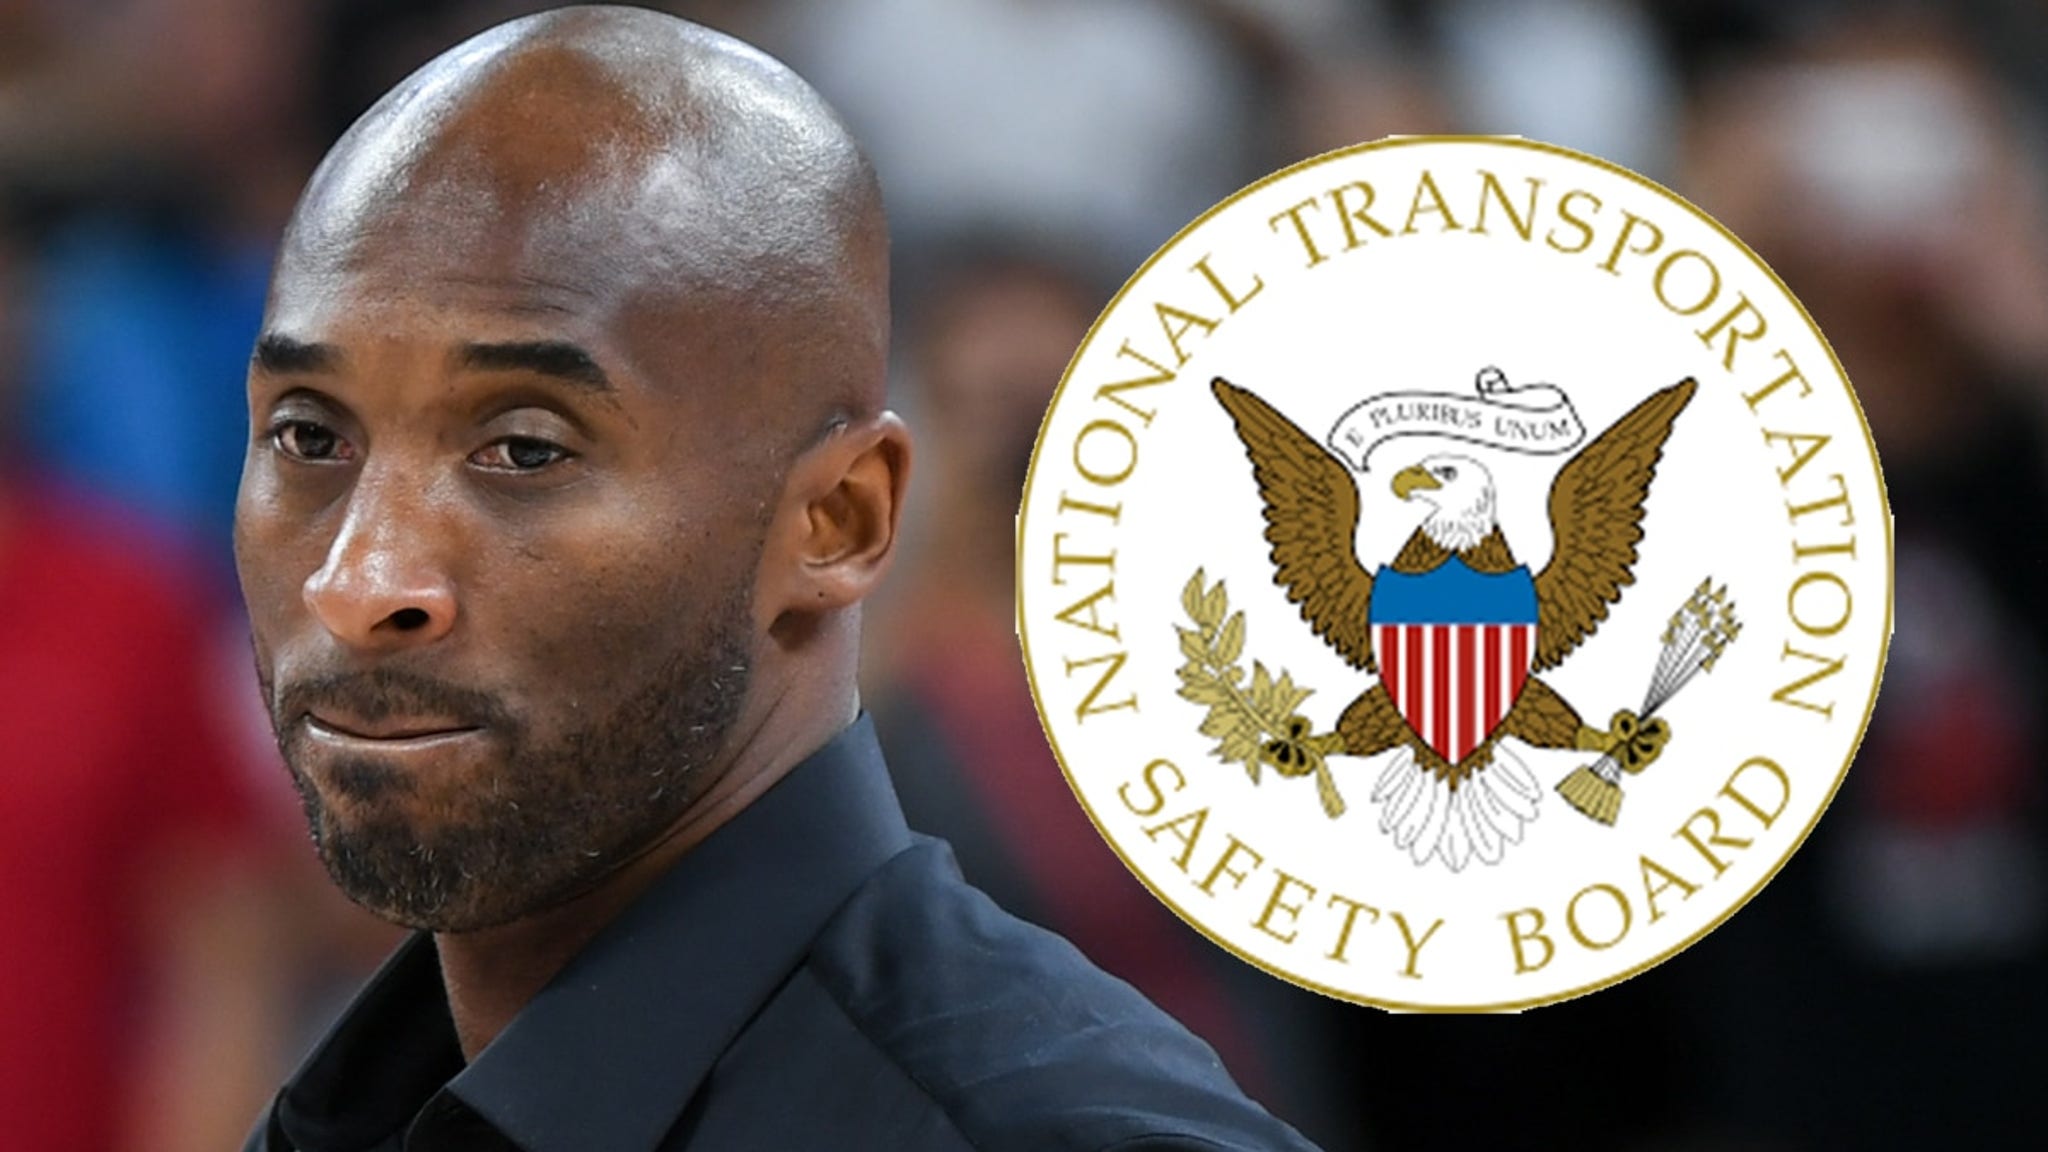 Kobe Bryant did NOT put Pilot under pressure to fly through dangerous conditions, say investigators